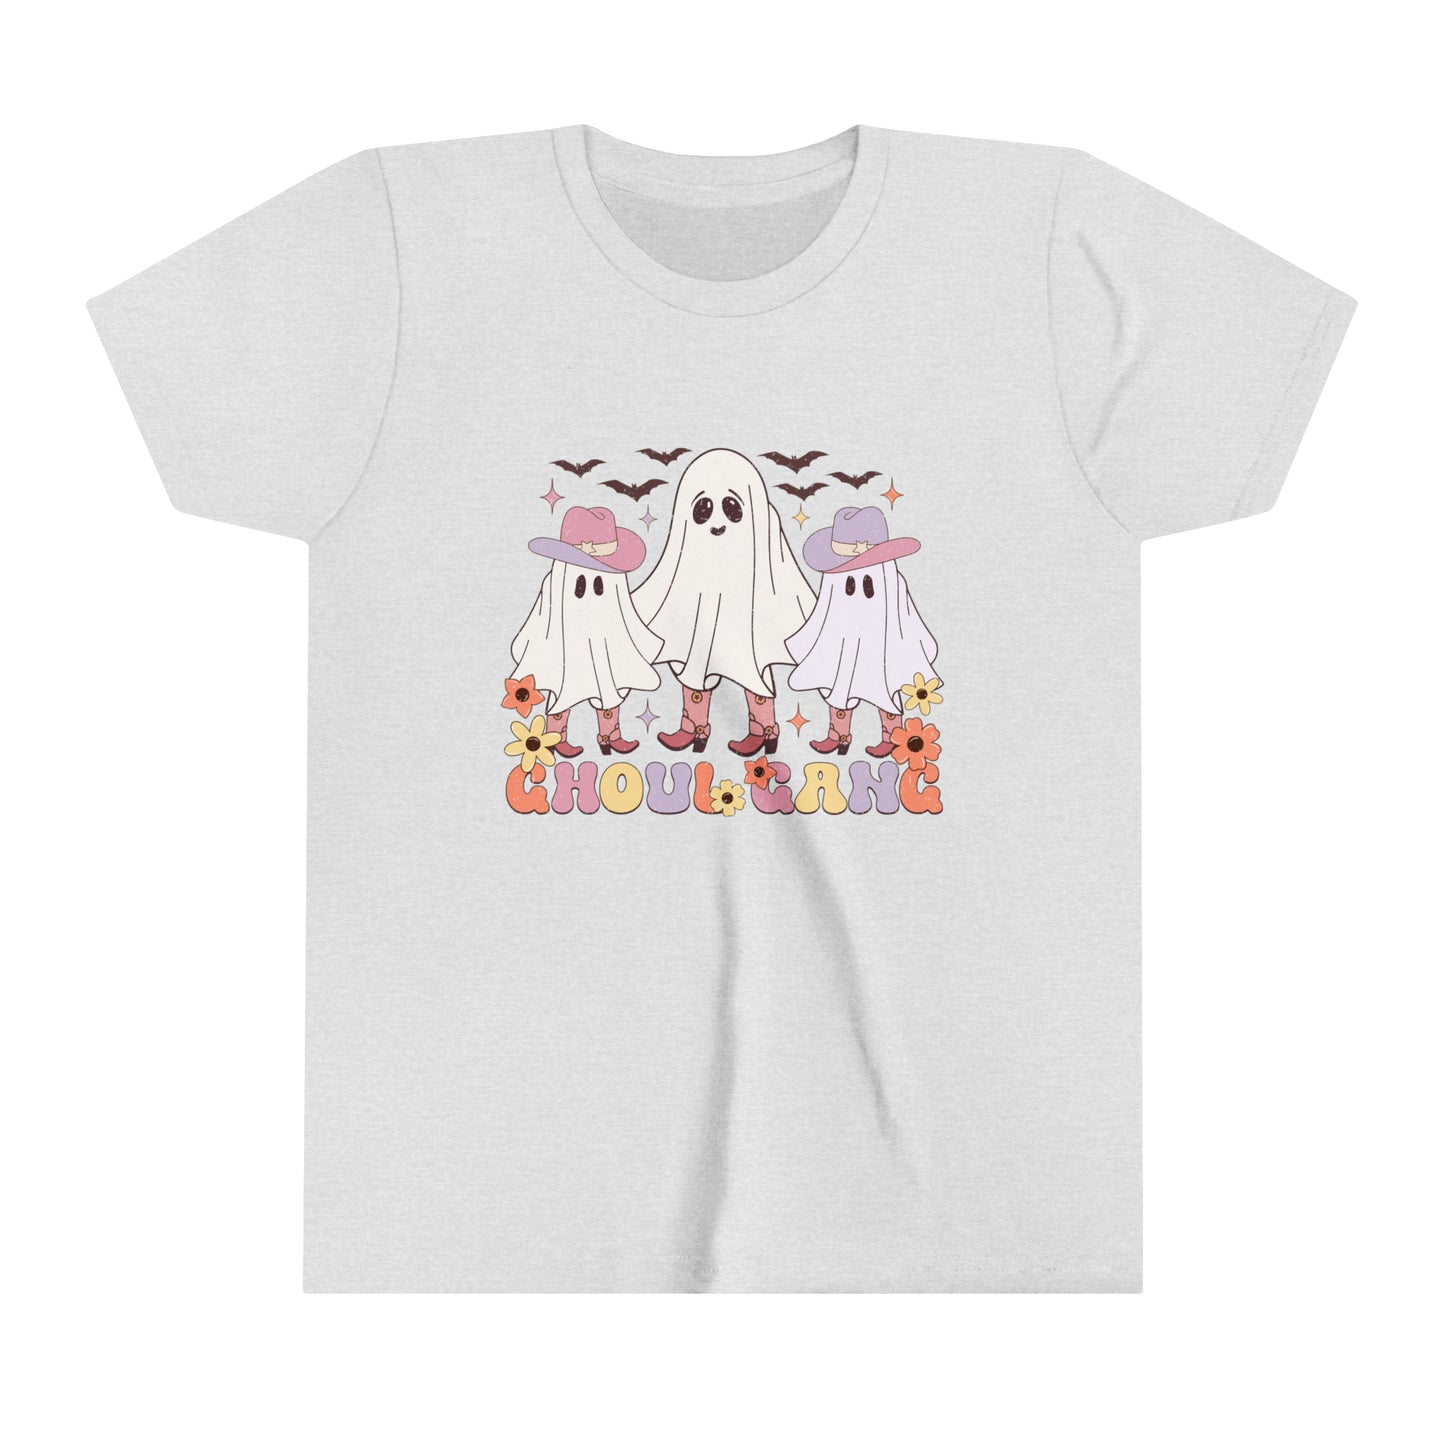 Ghoul Gang Girl's Youth Short Sleeve Tee